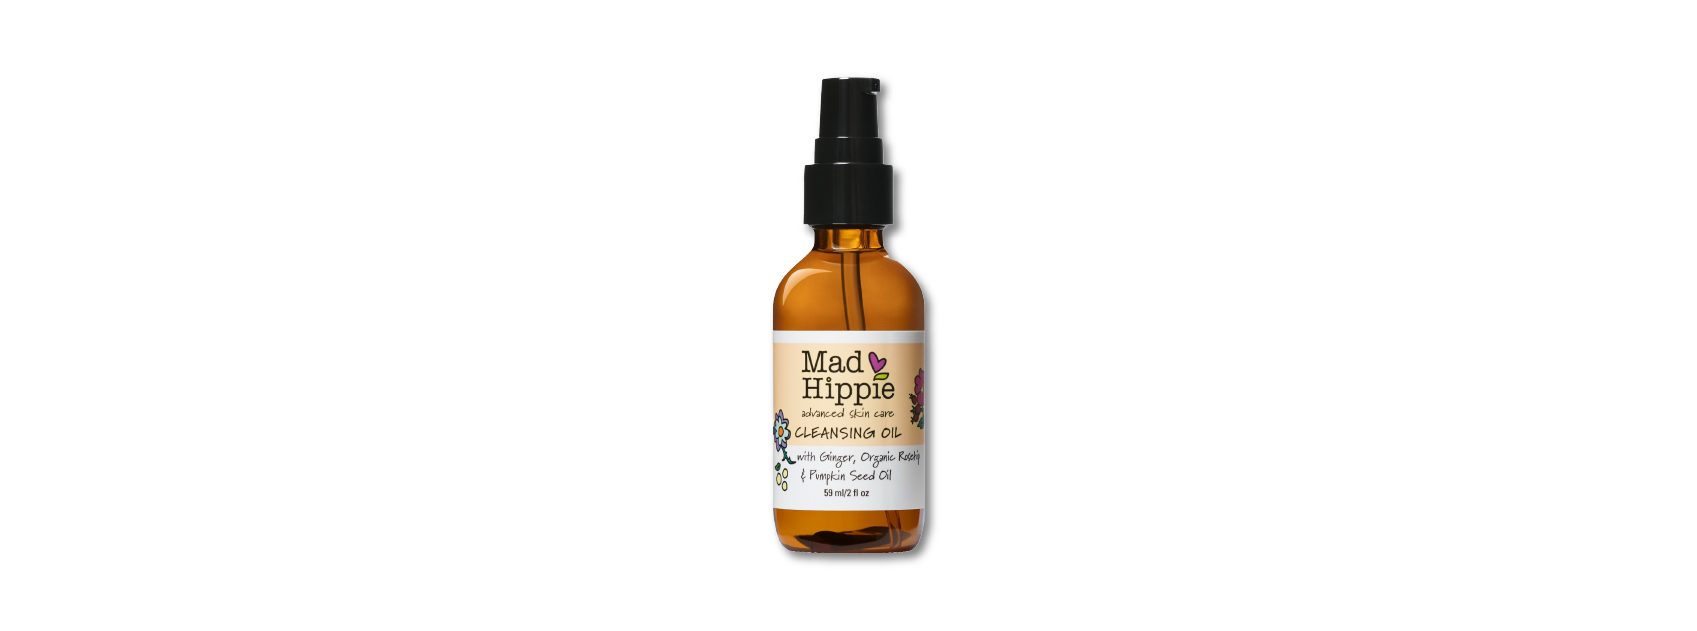 bottle of cleansing oil by mad hippie